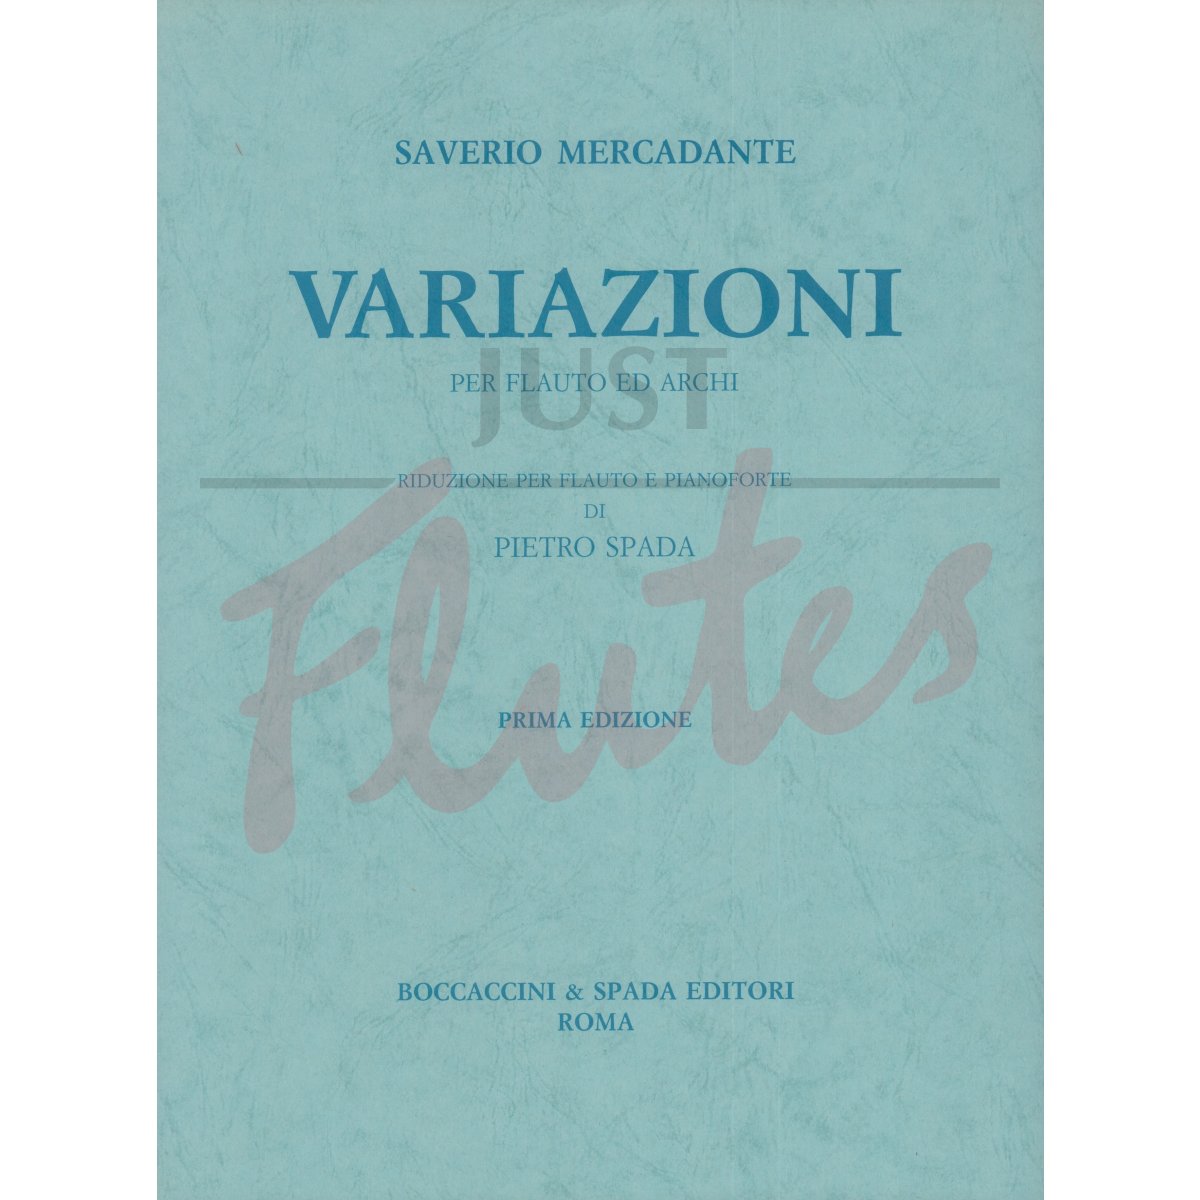 Variations in A major for Flute and Piano